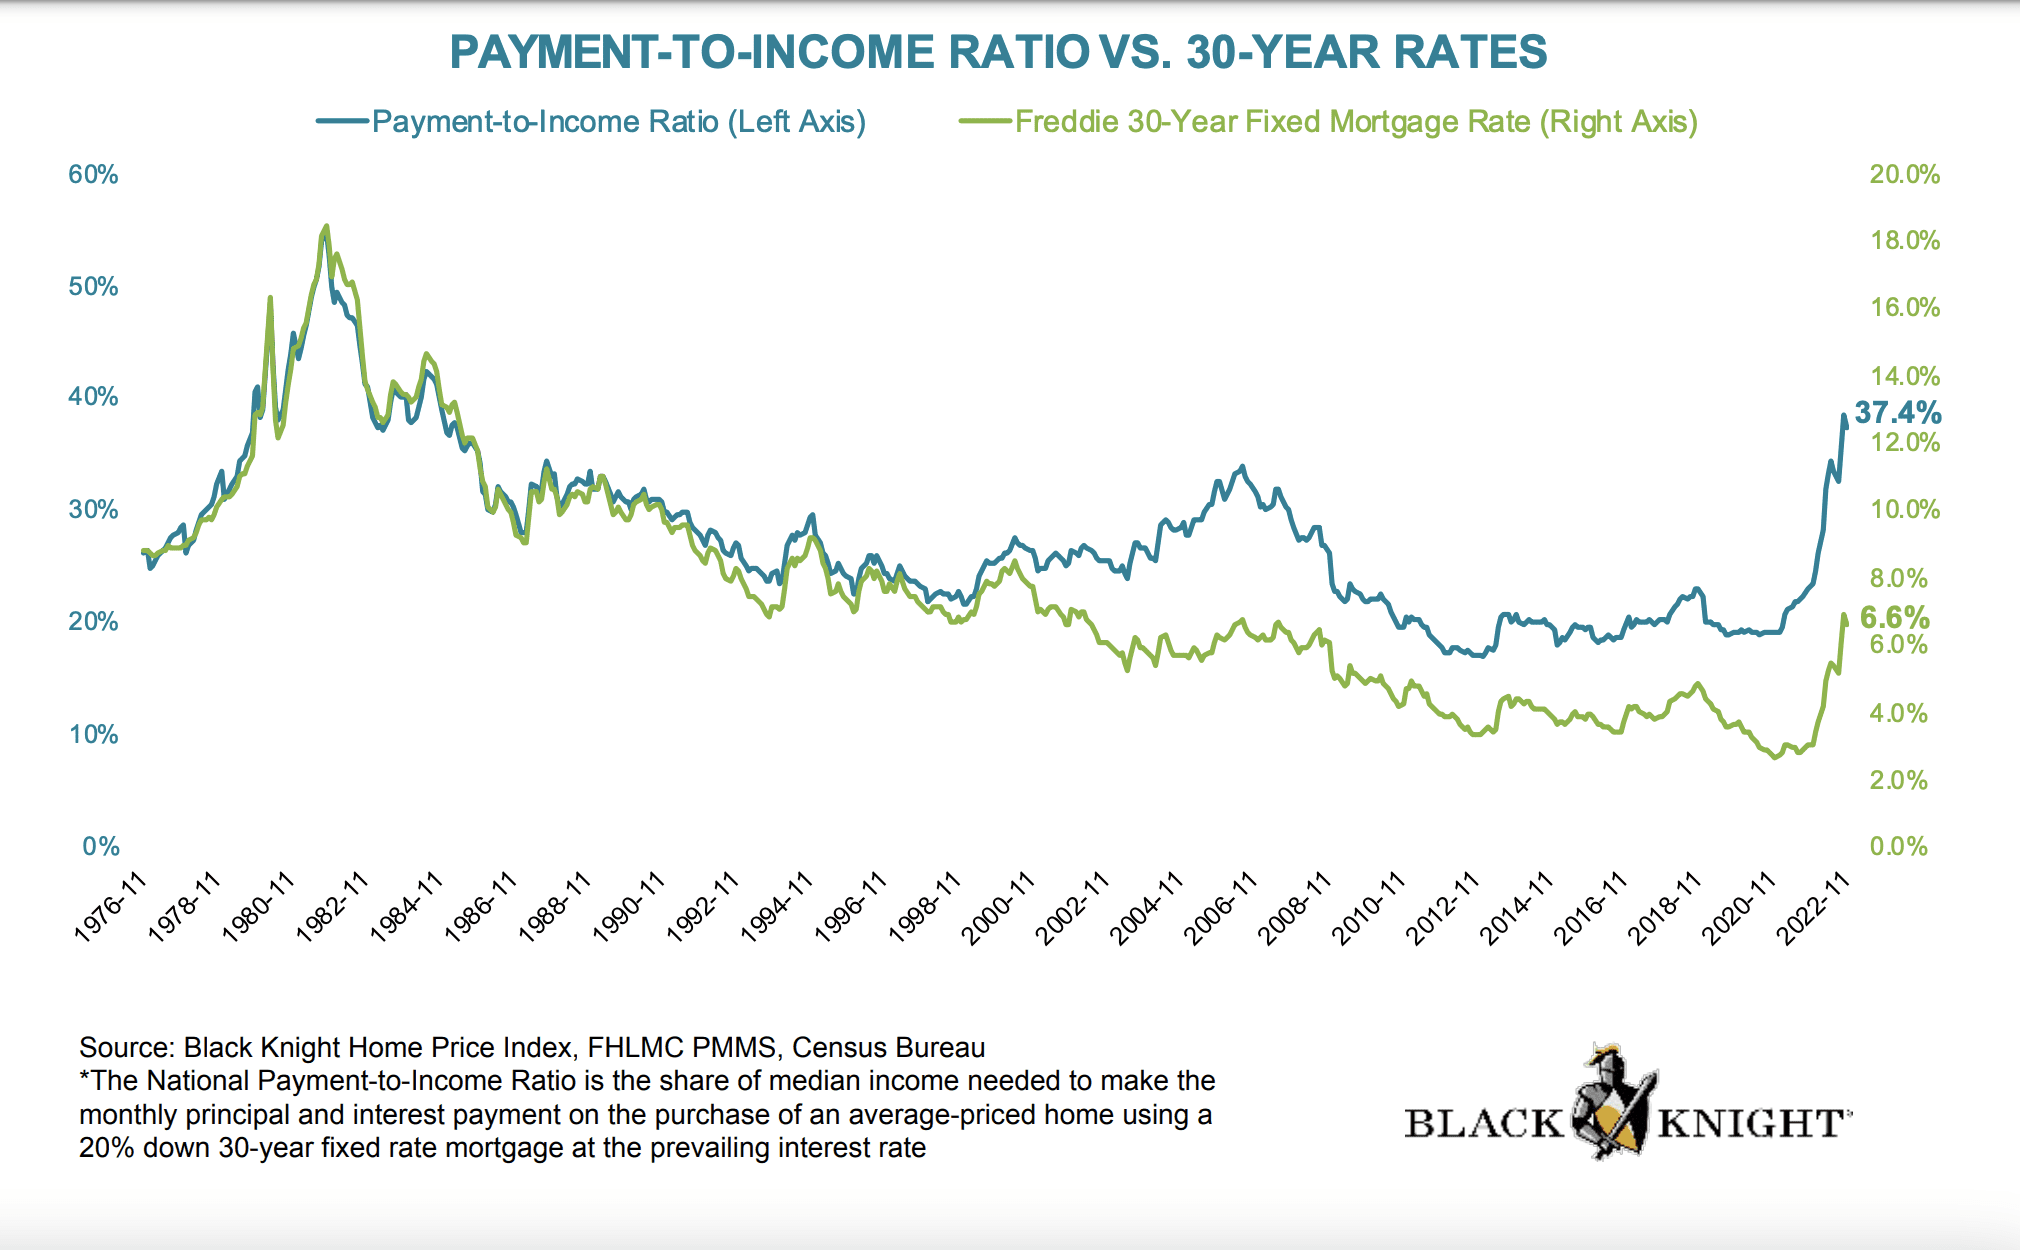 Chart of the payment to income ratio an the 30-year fixed mortgage rate in the US from 1976 to late 2022.